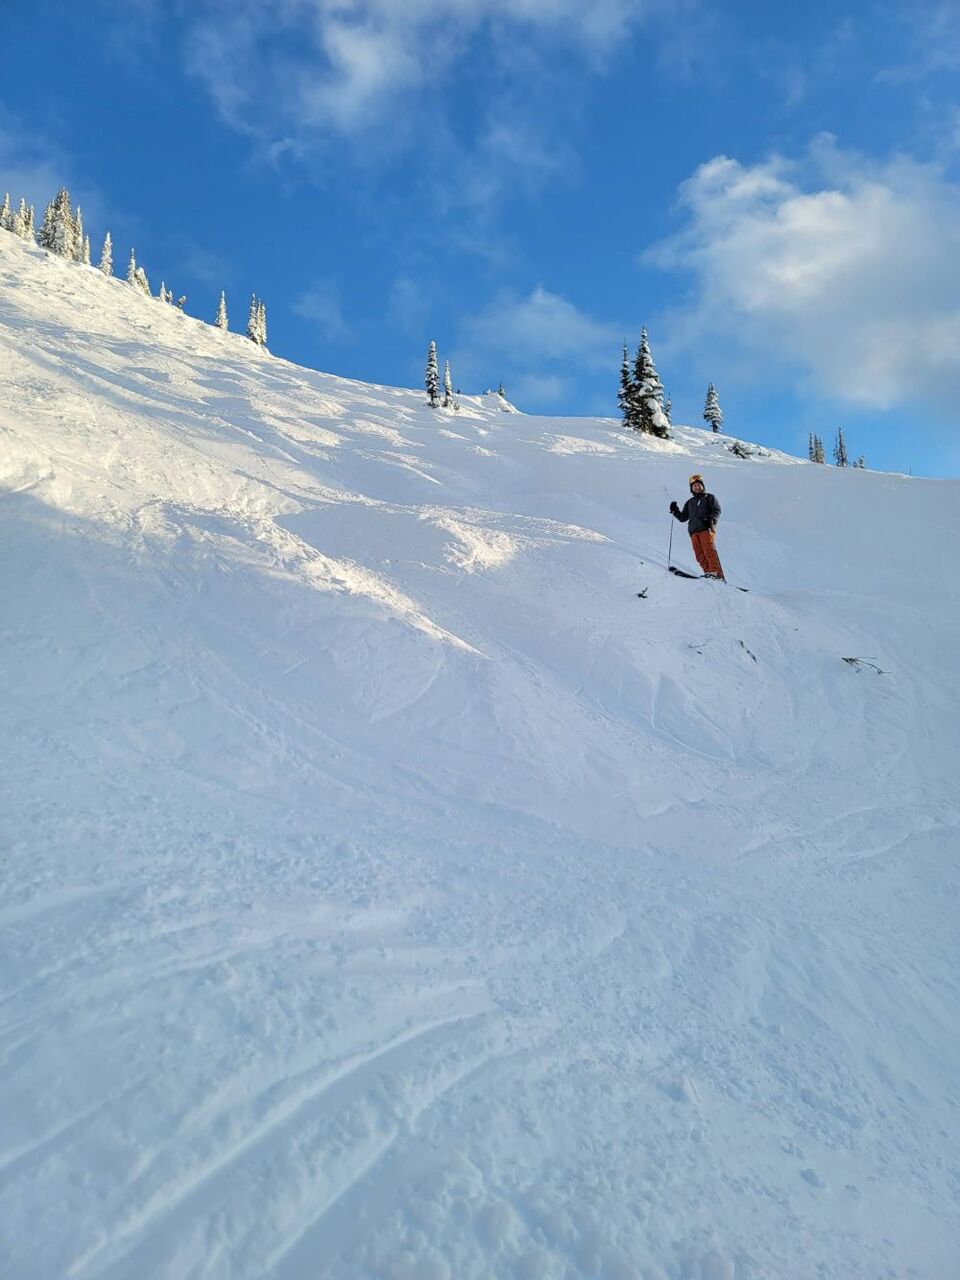 Me standing on a mogul, probably just before wiping out again.  Friday was a tough day...